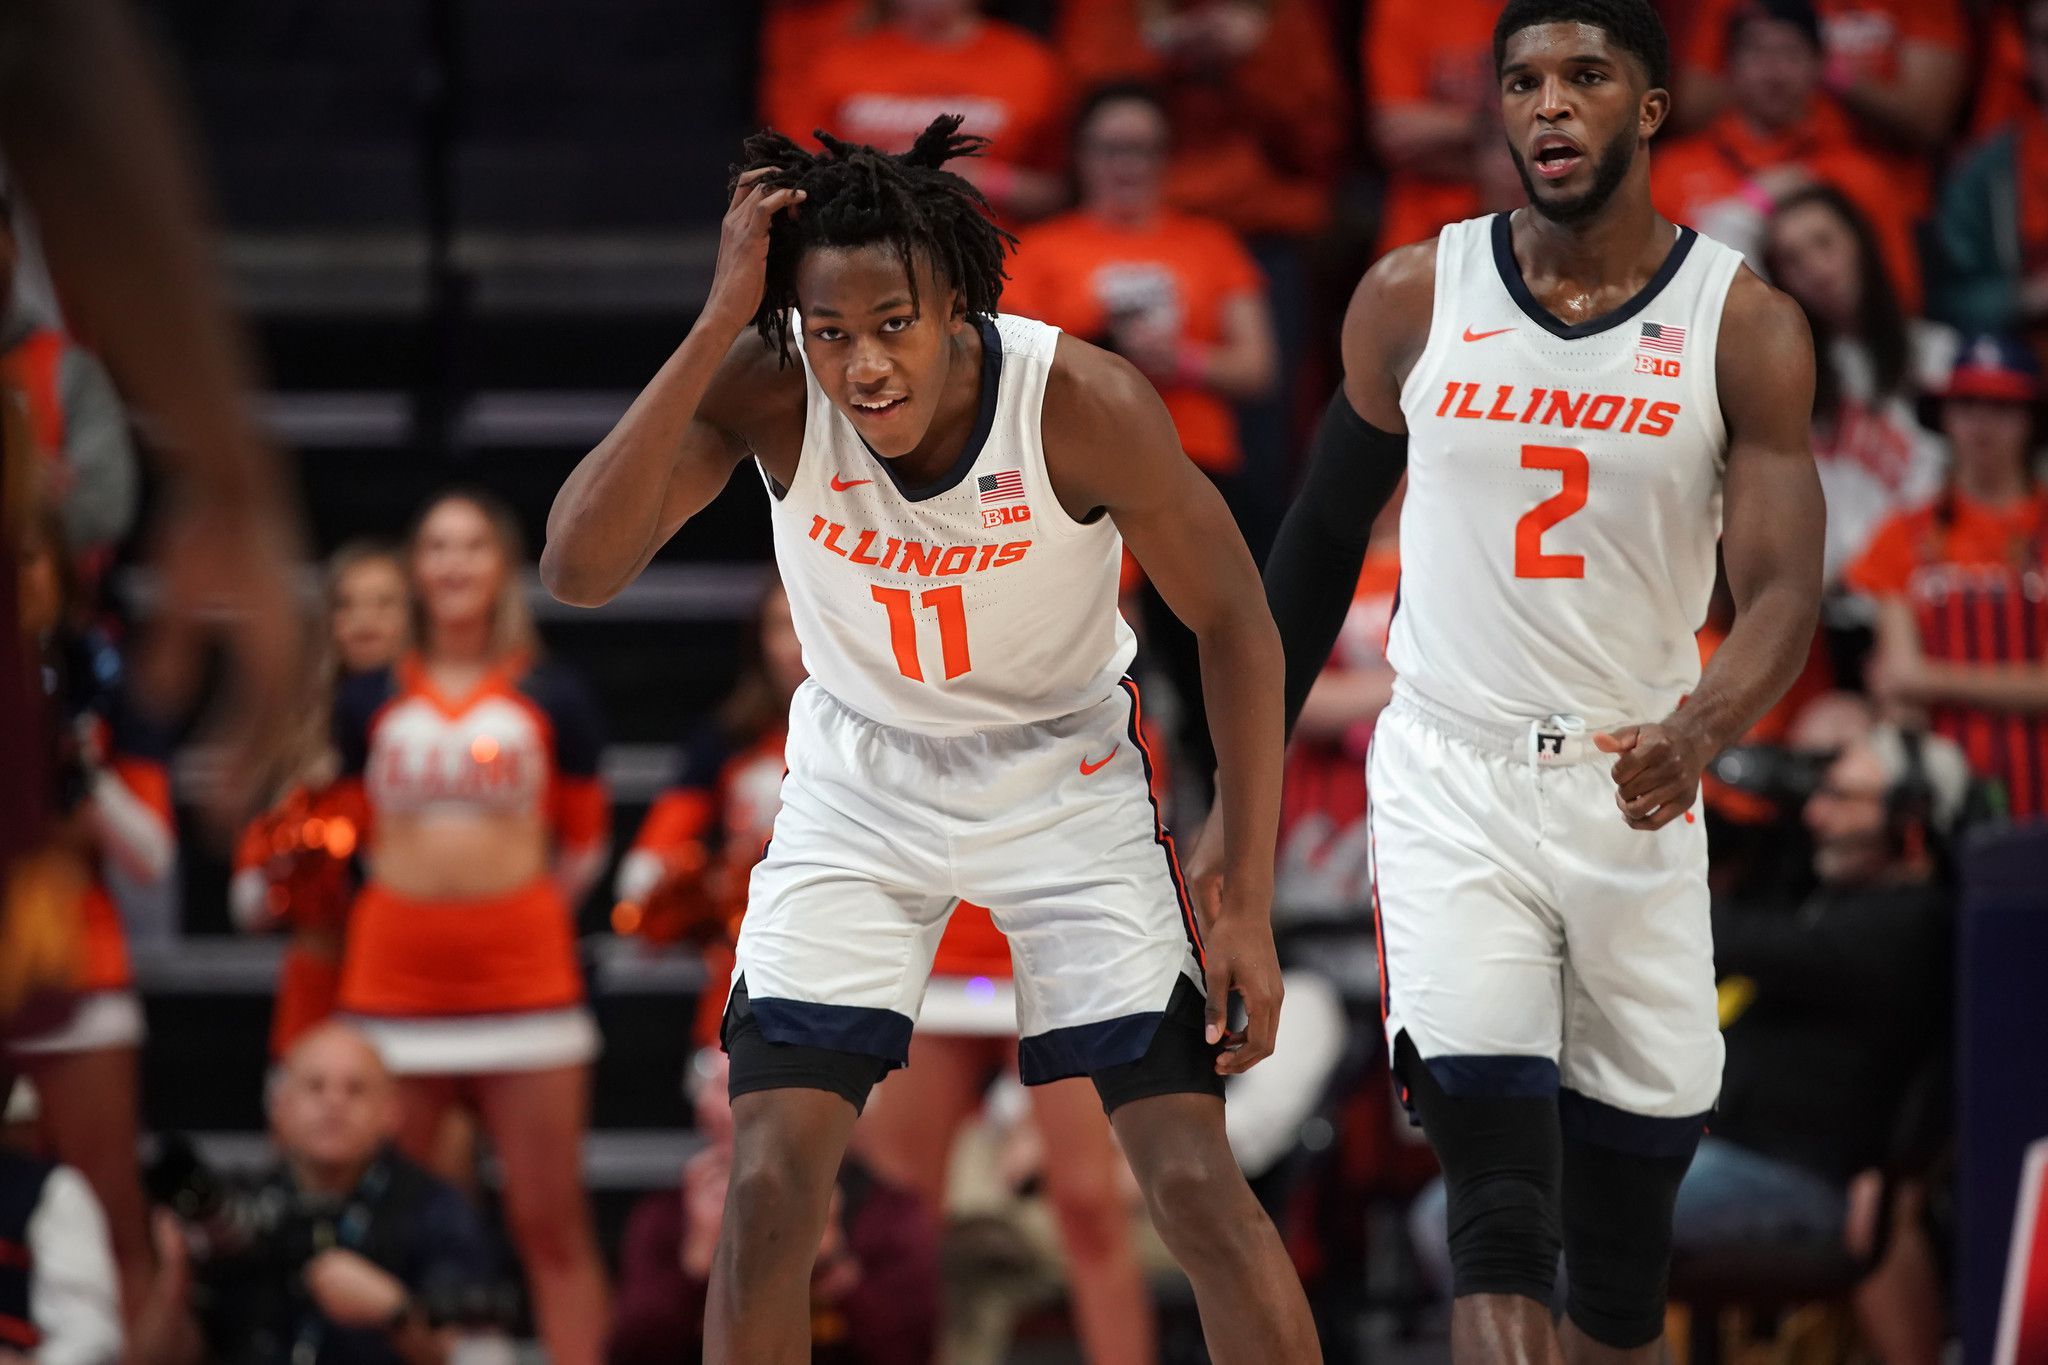 Illinois star Ayo Dosunmu's ascending basketball career can be credited to  his family's blueprint for success